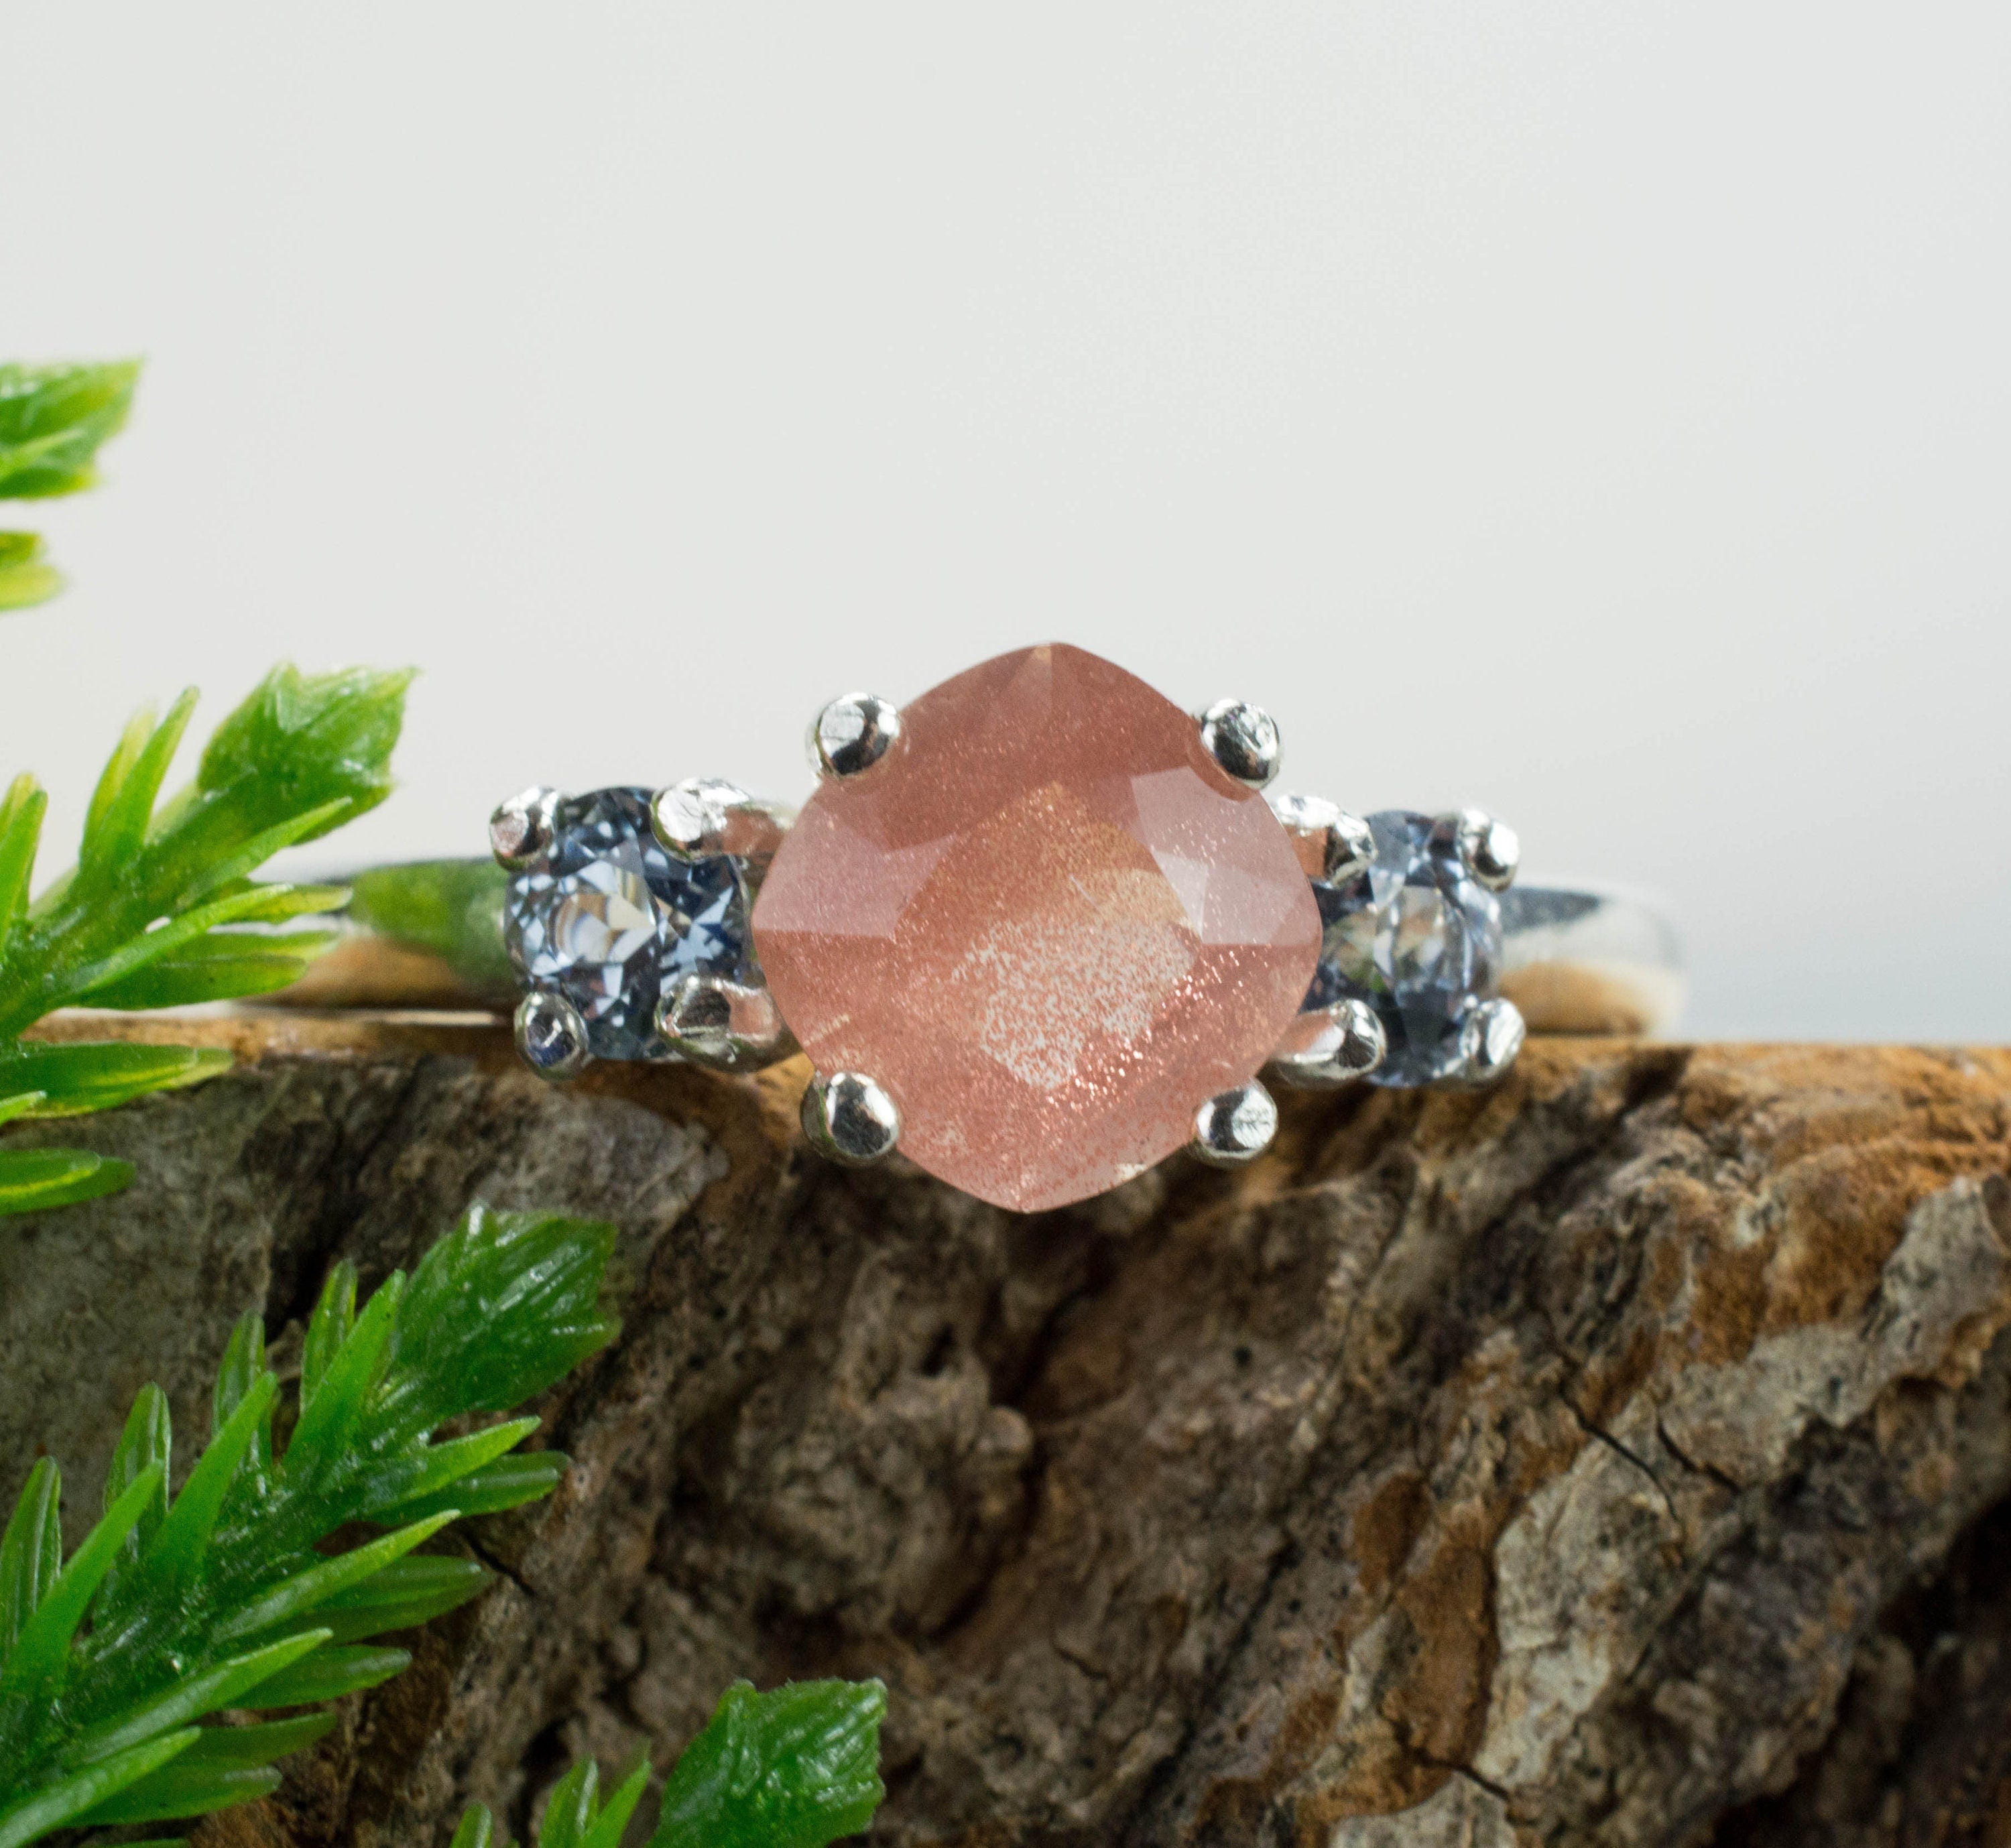 Oregon Sunstone and Gray Spinel Sterling Silver Ring, Genuine Untreated Sunstone and Spinel; Sunstone Ring; Gray Spinel Ring - Mark Oliver Gems